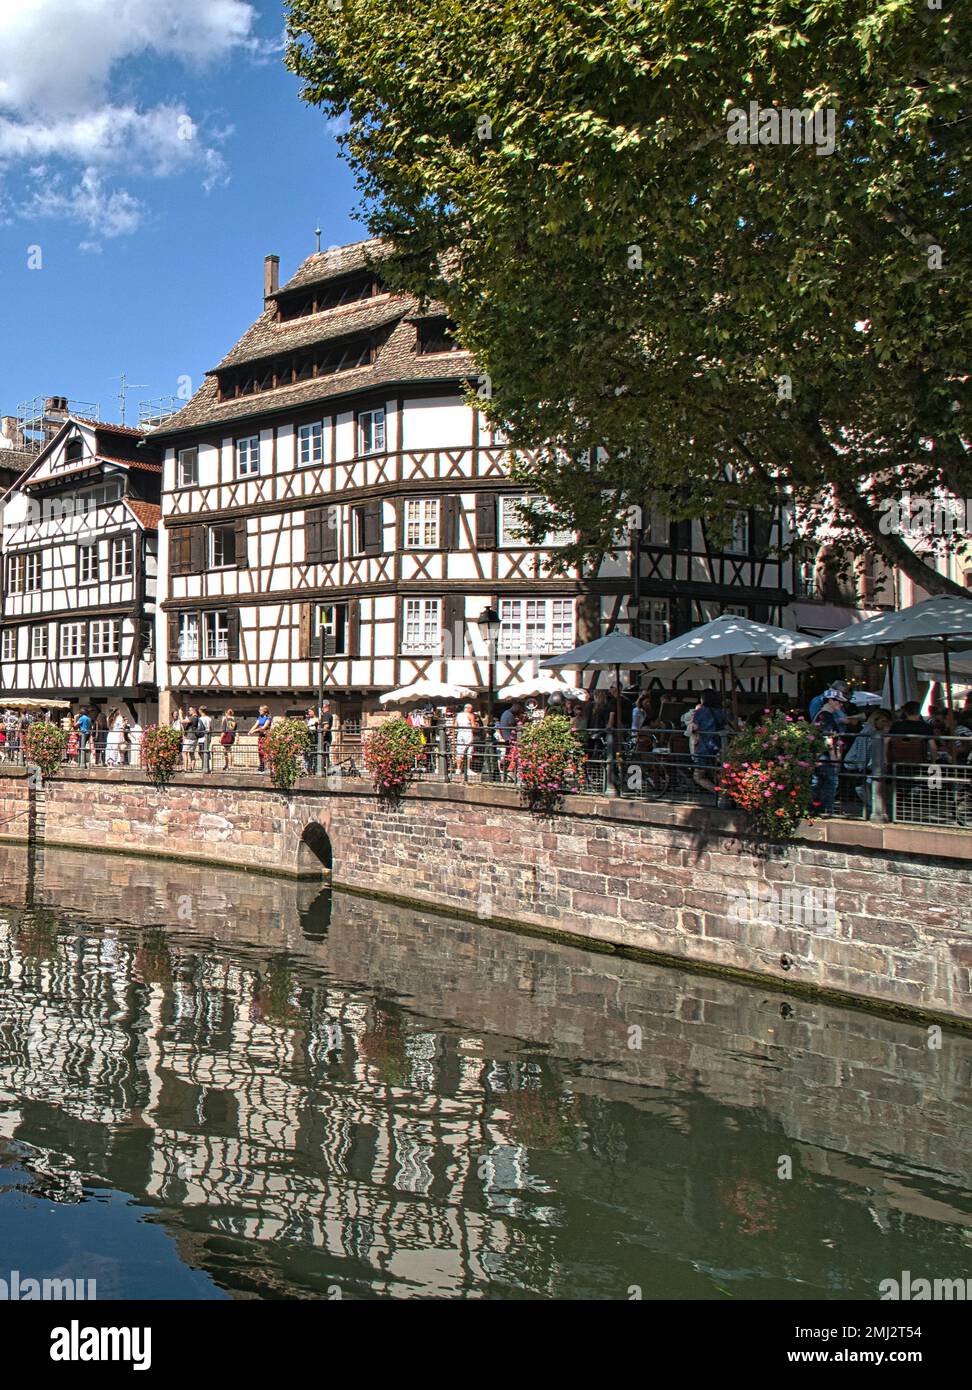 Canalside scene with half-timbered buildings and cafe terrace, Strasbourg, Alsace, France Stock Photo